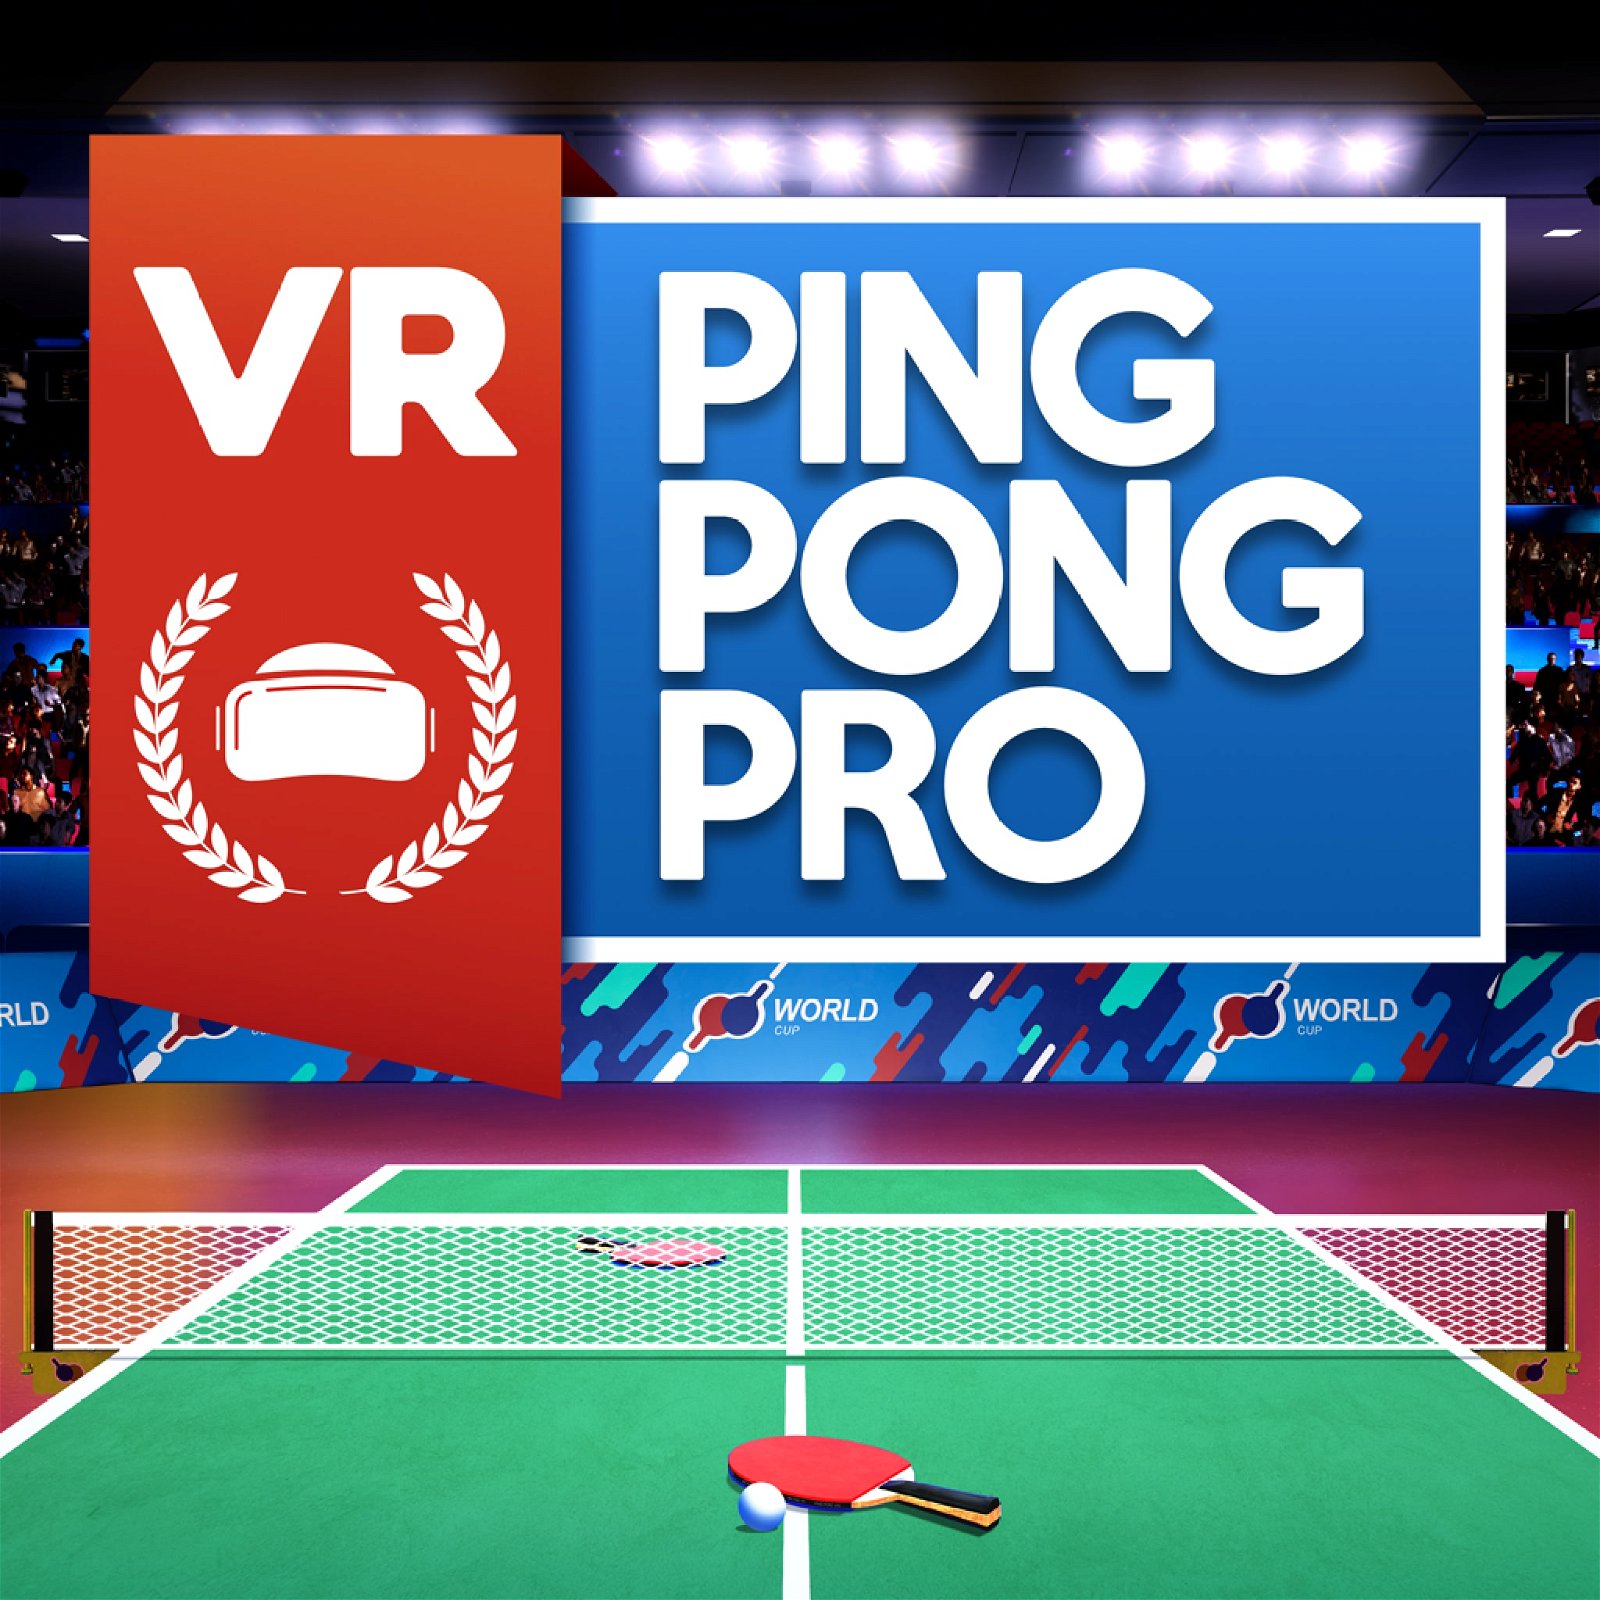 Image of VR Ping Pong Pro